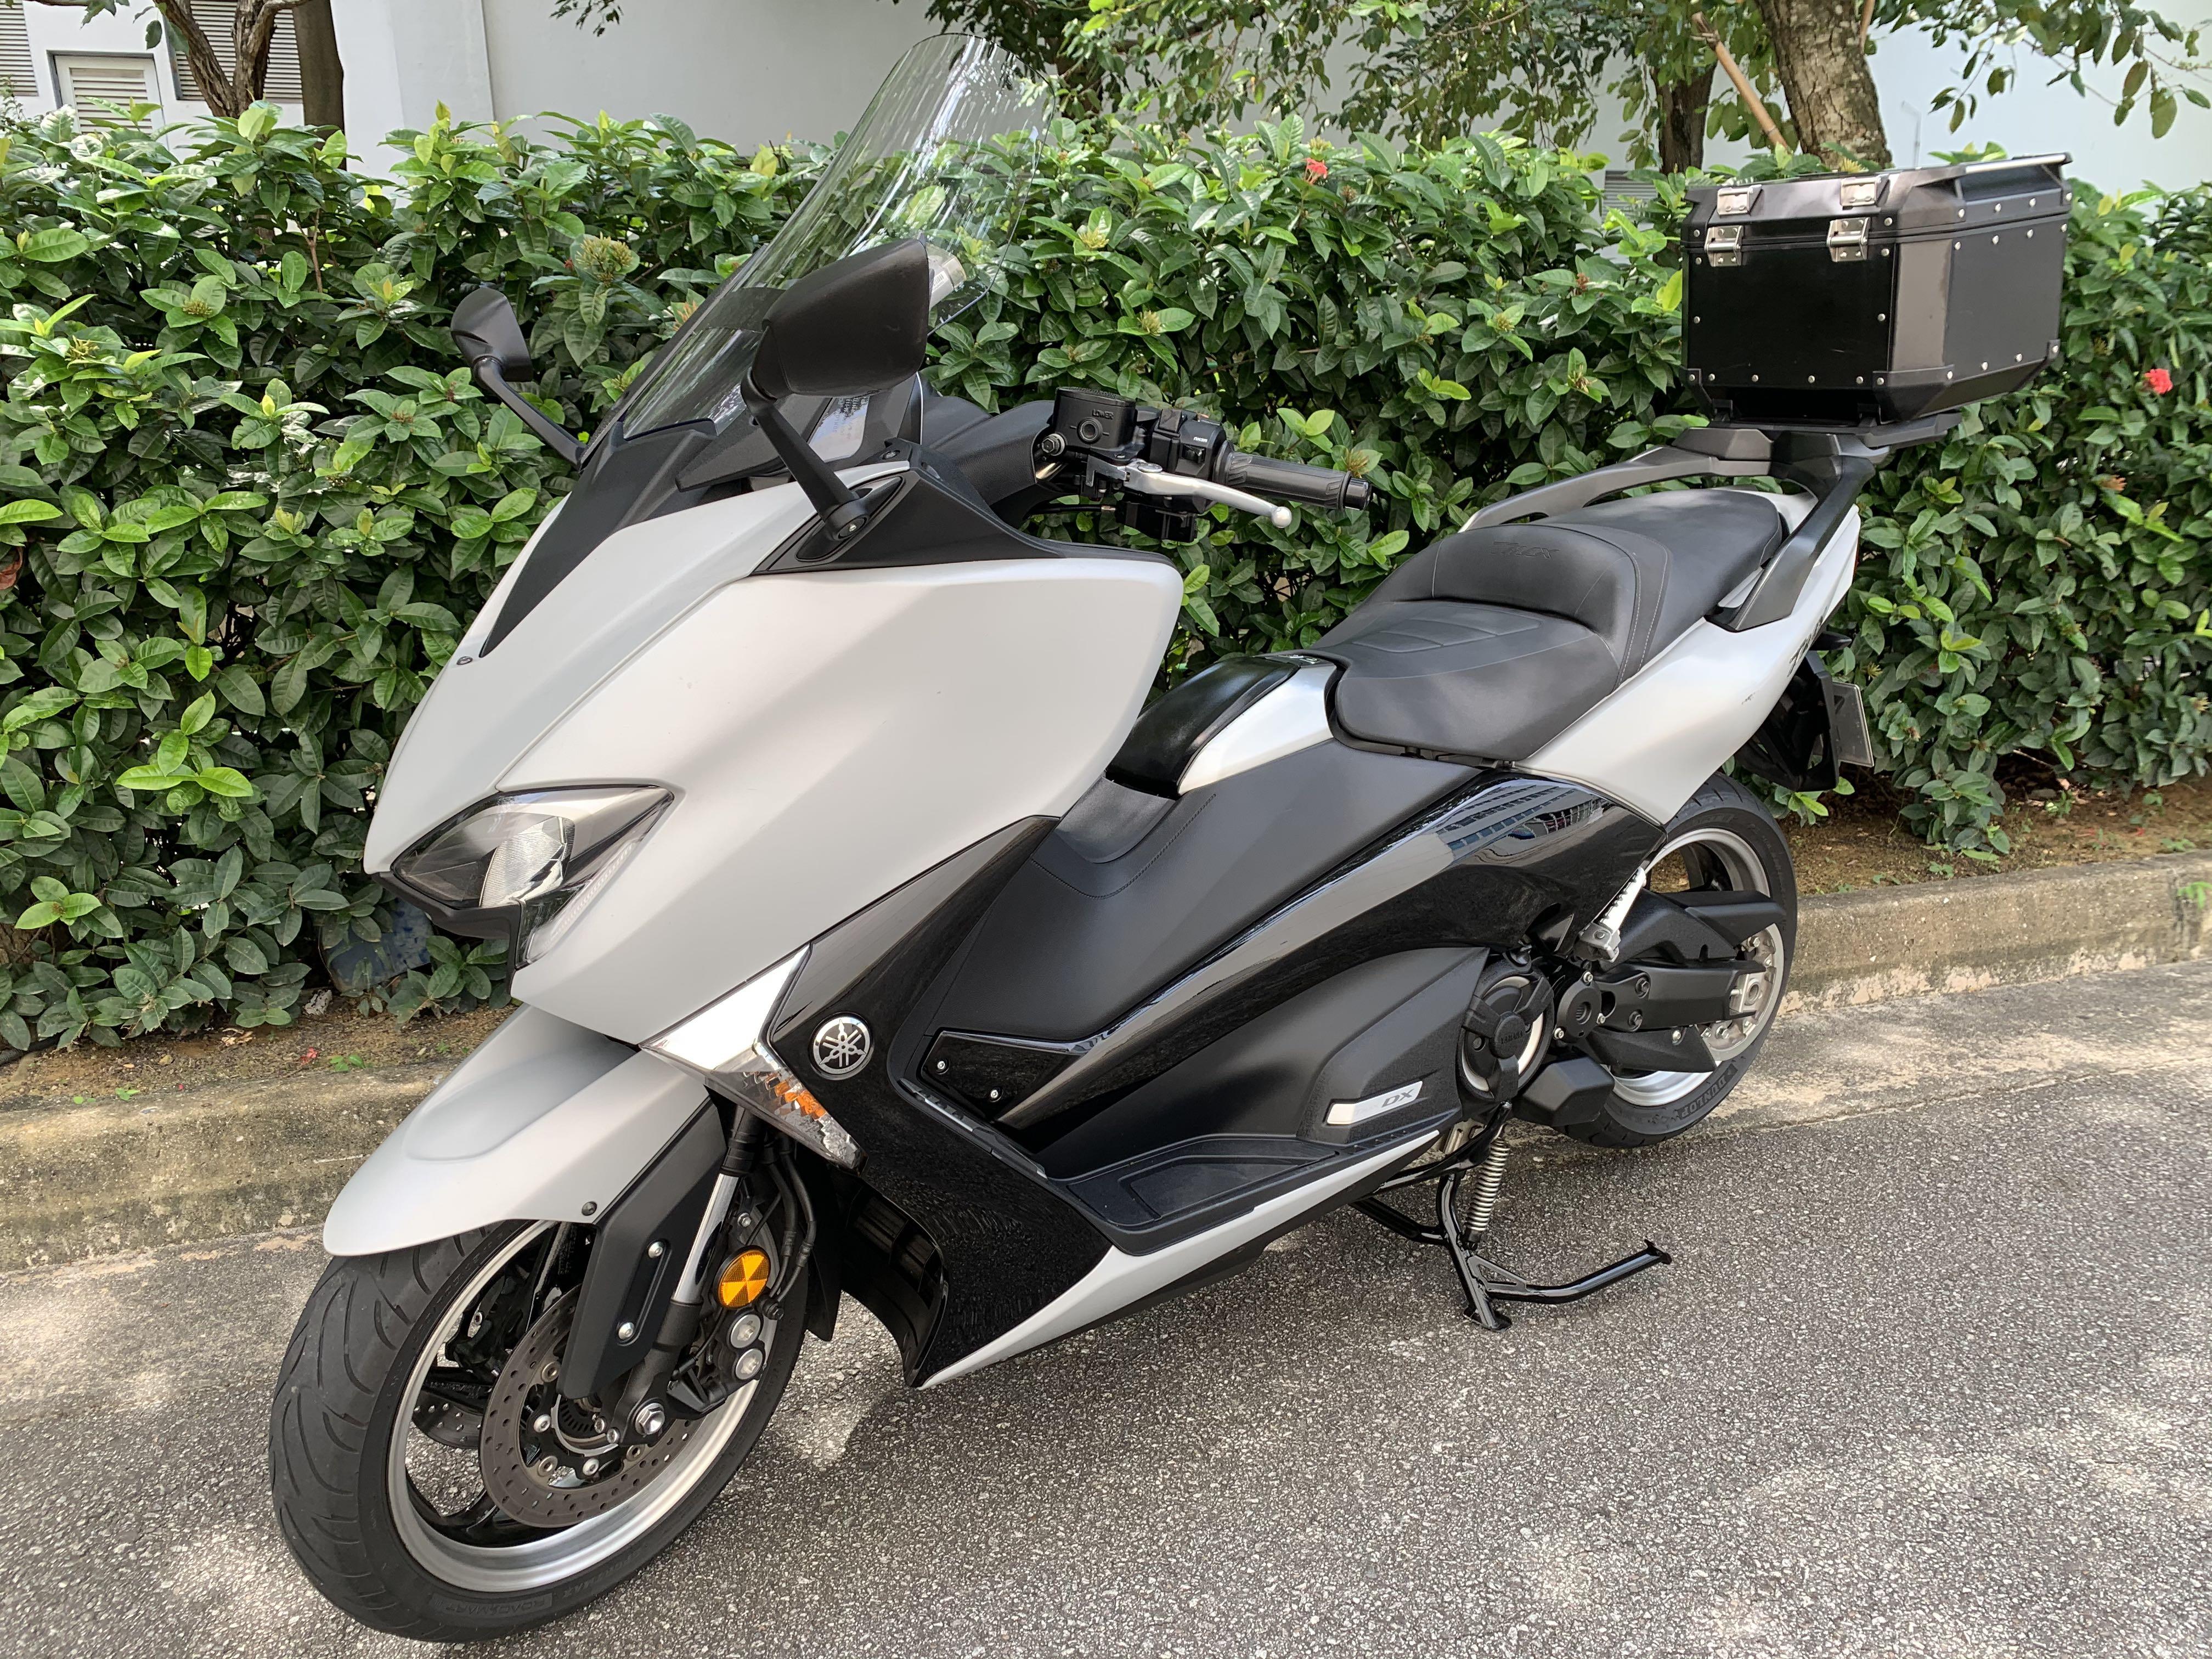 Yamaha Tmax 530 DX With ABS + TCS. One Mature Owner Upgrading